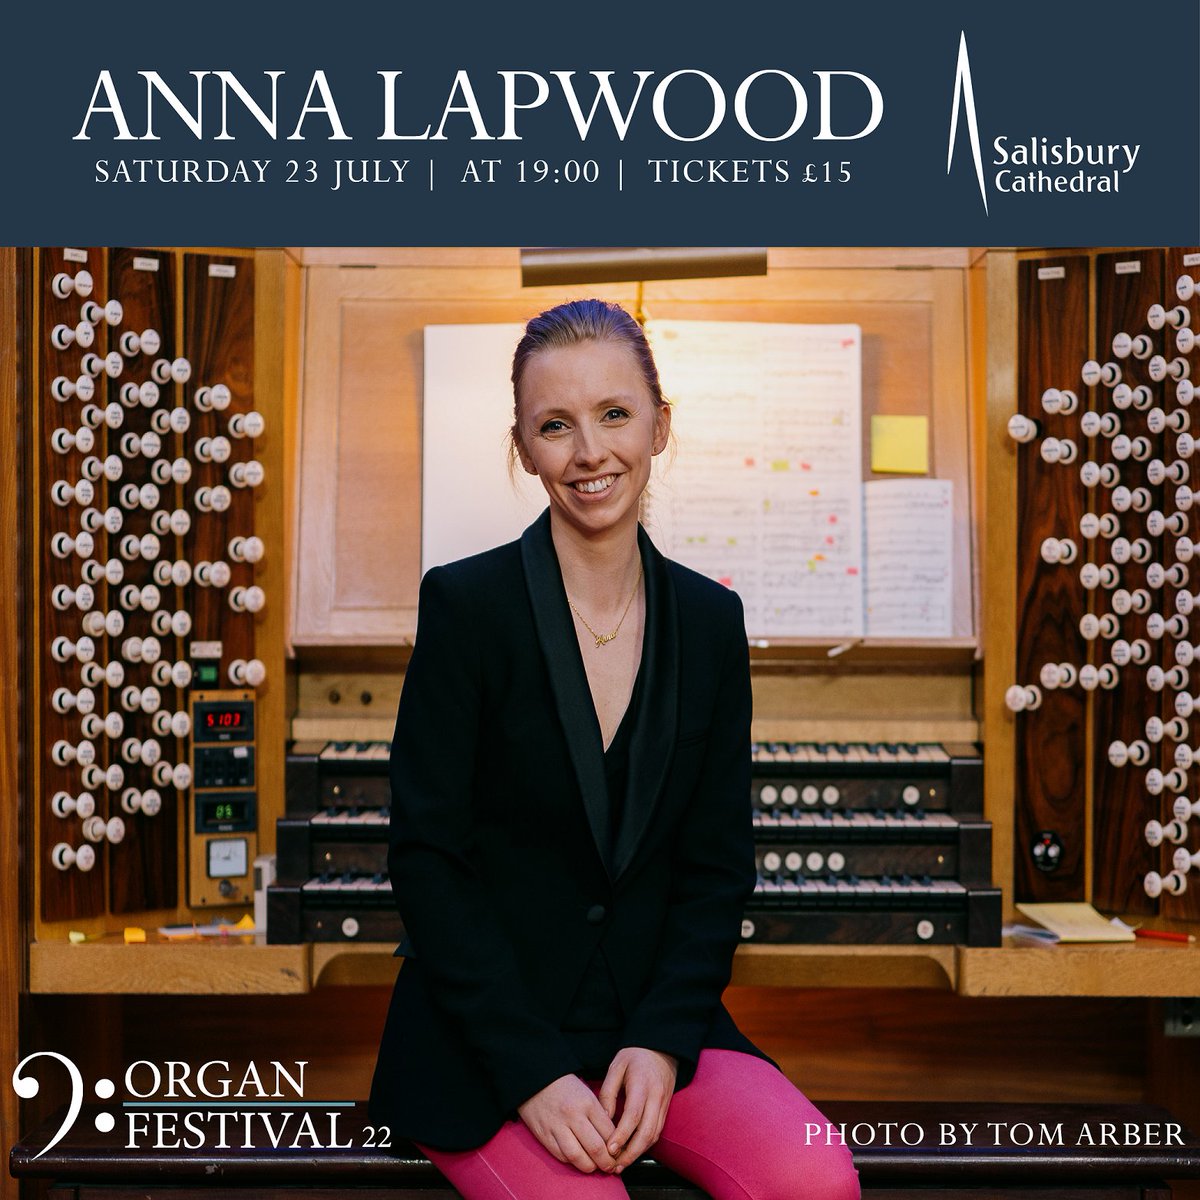 On Saturday 23 July, internationally-renowned musician Anna Lapwood joins us for a special classical concert as part of our 2022 Organ Festival: bit.ly/3N5wnbX #OrganFestival22 #SalisburyCathedral #FatherWillisOrgan #CathedralOrgan #LiveOrganMusic #CathedralMusic